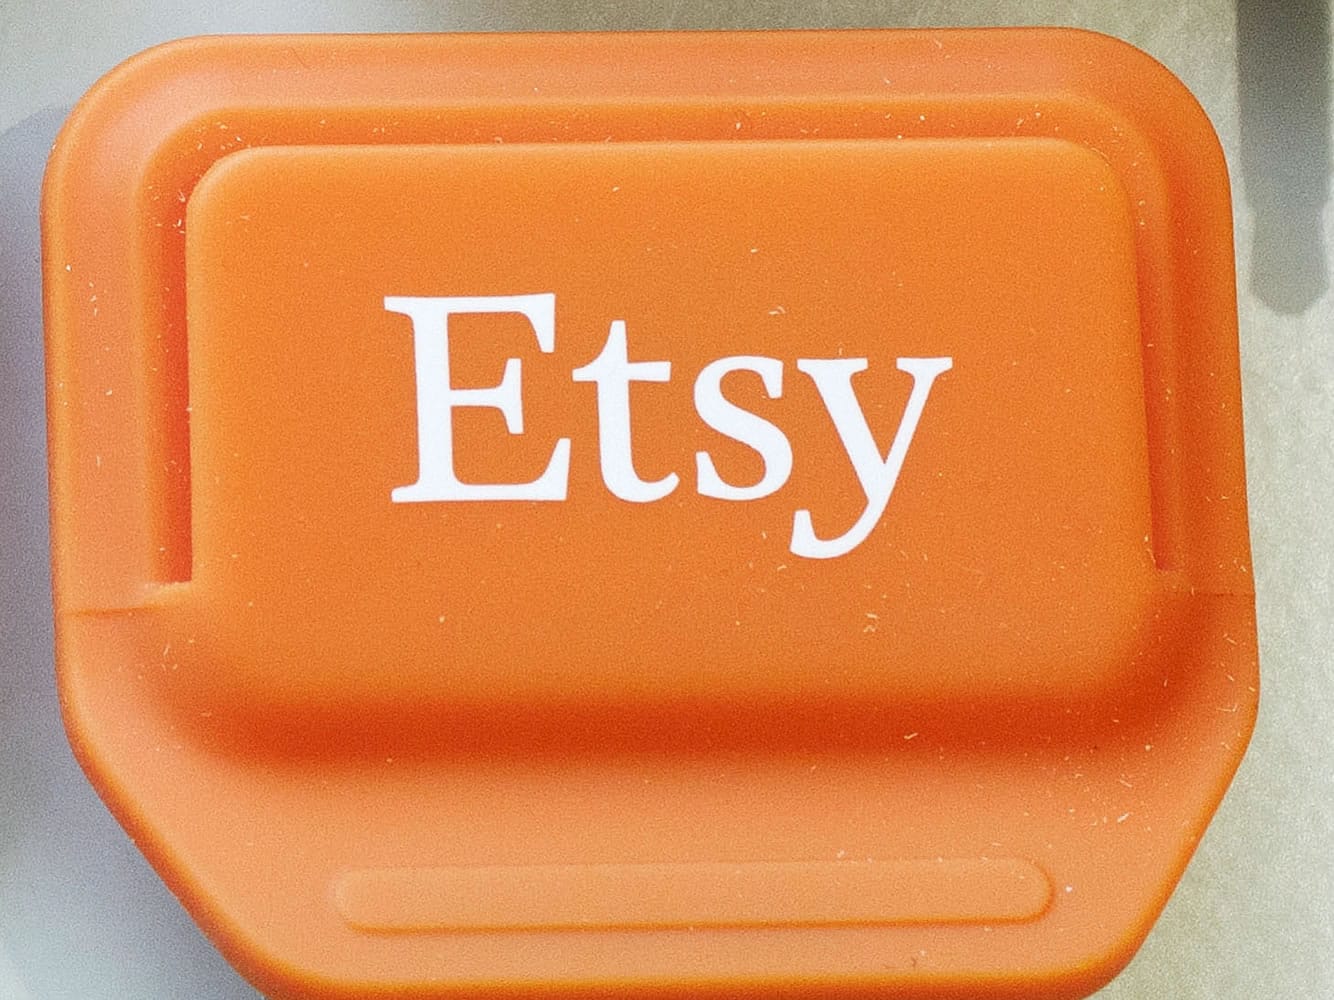 This Tuesday, Jan. 6, 2015 photo shows an Etsy mobile credit card reader, in New York. If craft seller Etsy goes public later this year it will be a test of how well the company can balance an explicit social mission with shareholder expectations for making money.